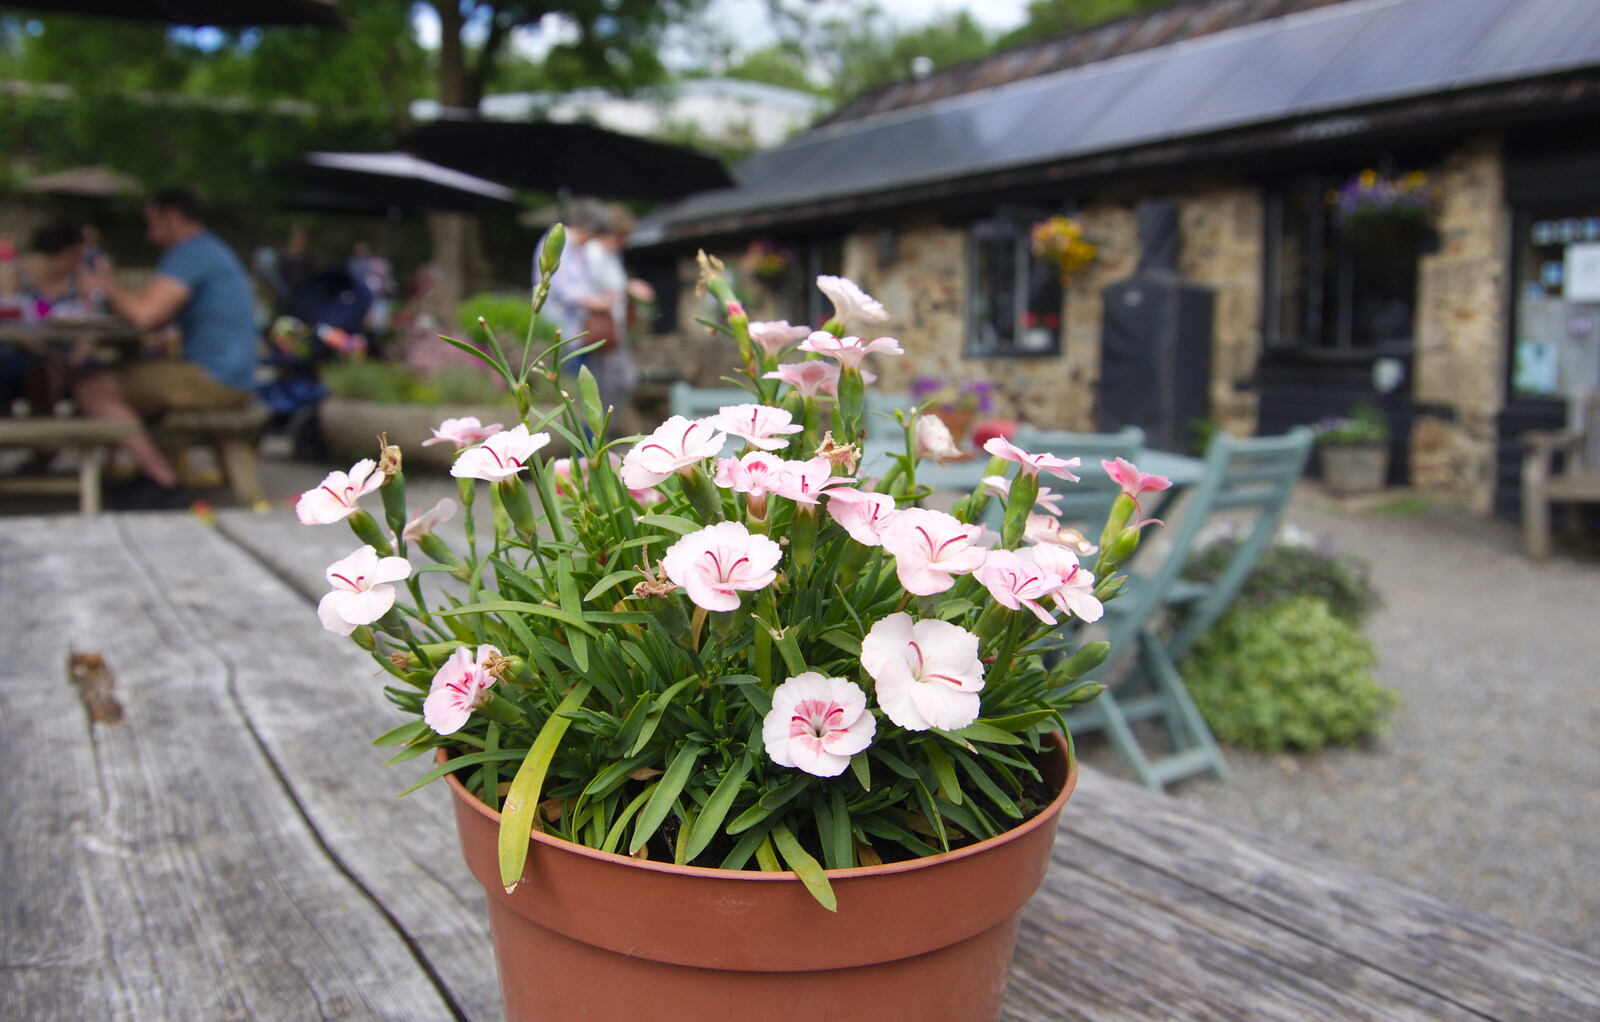 Chagford Lido and a Trip to Parke, Bovey Tracey, Devon - 25th May 2019: A nice pot of flowers